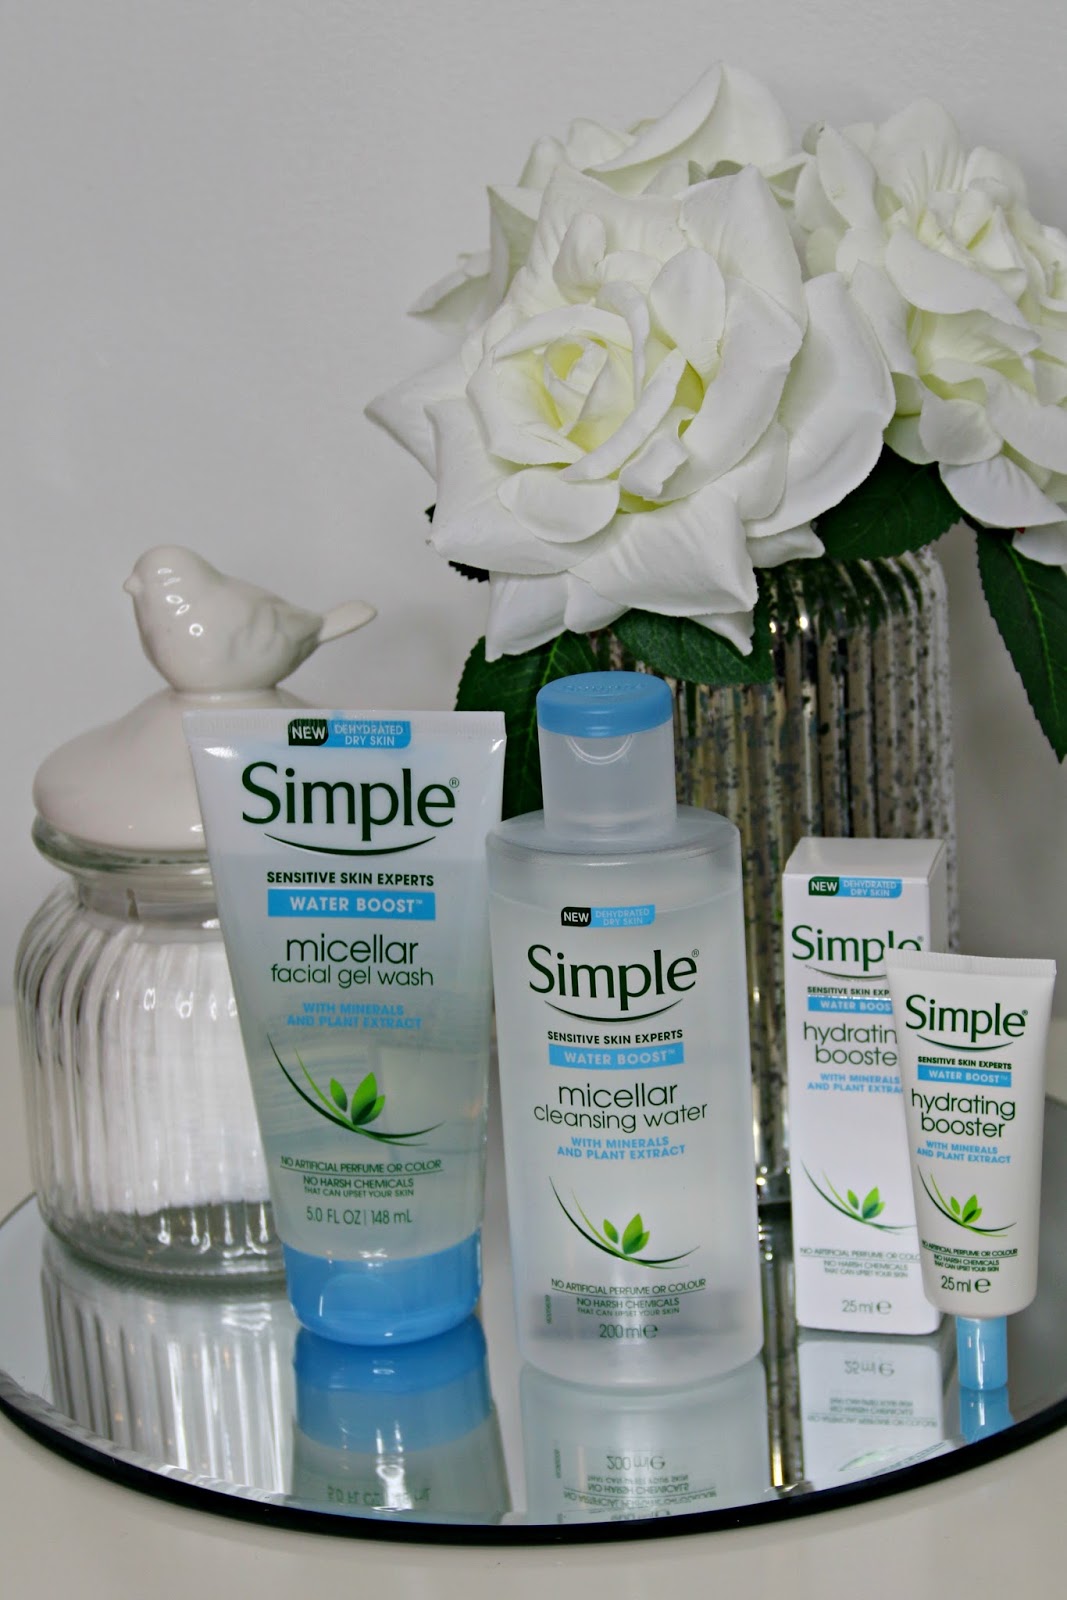 Simple Water Boost Range Review: Micellar Facial Gel Wash, Micellar Water and Hydrating Booster